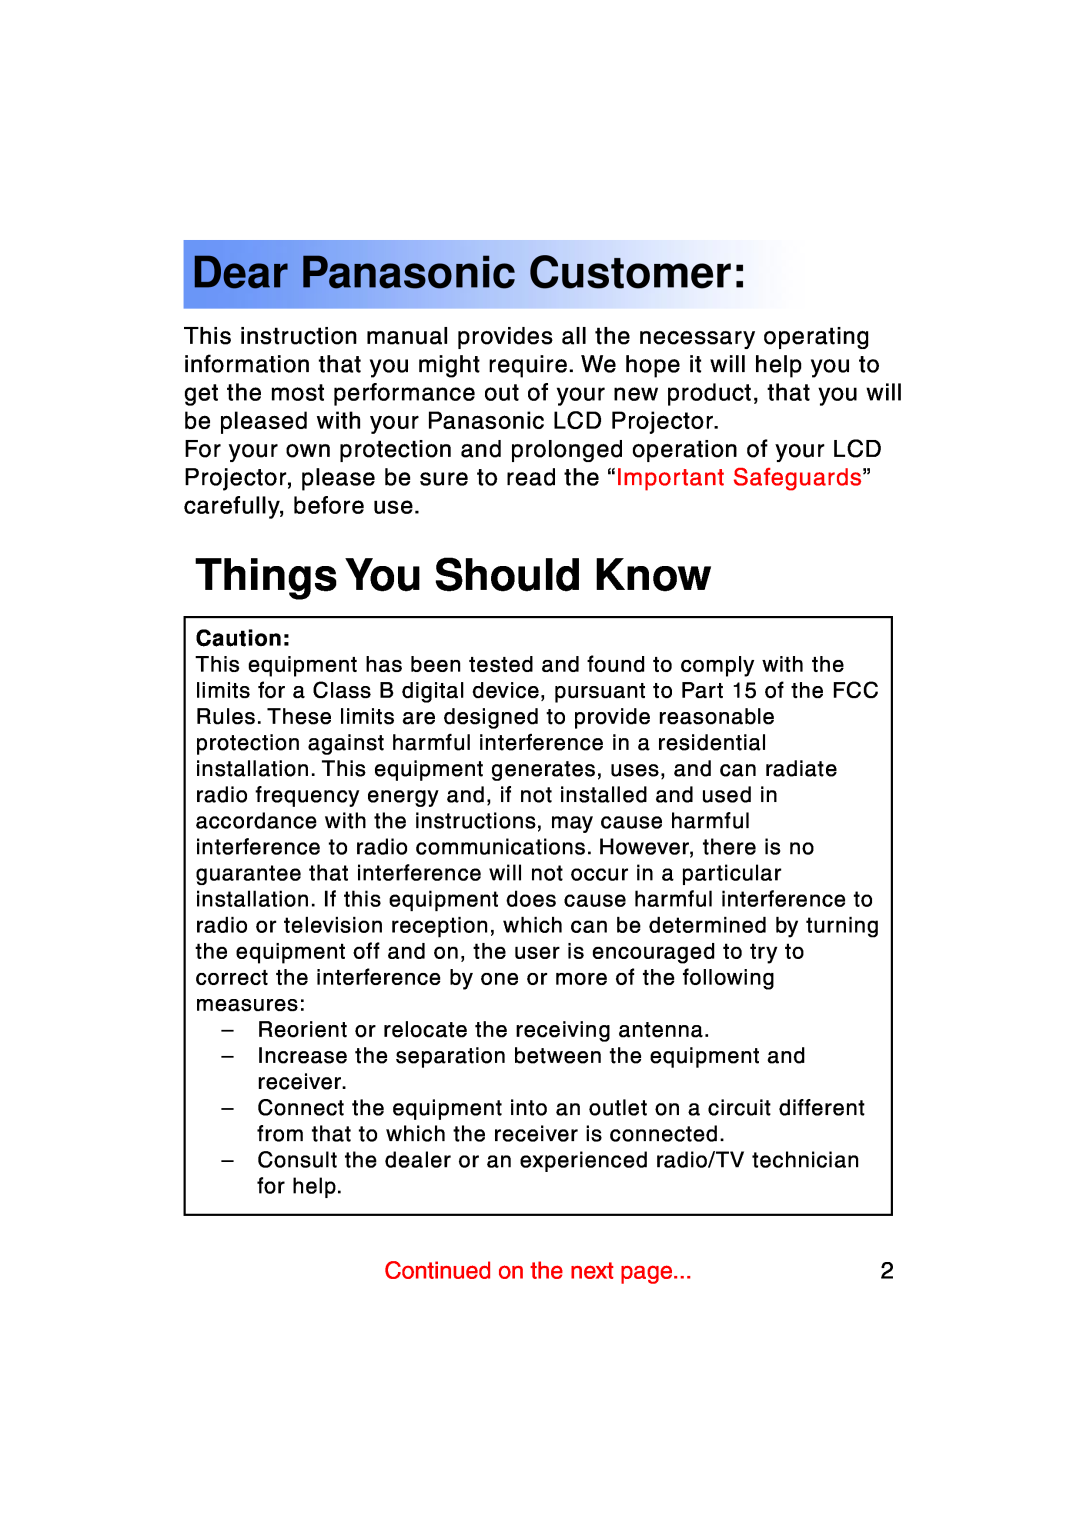 Panasonic PT-LC50U manual Dear Panasonic Customer, Things You Should Know, Continued on the next page 